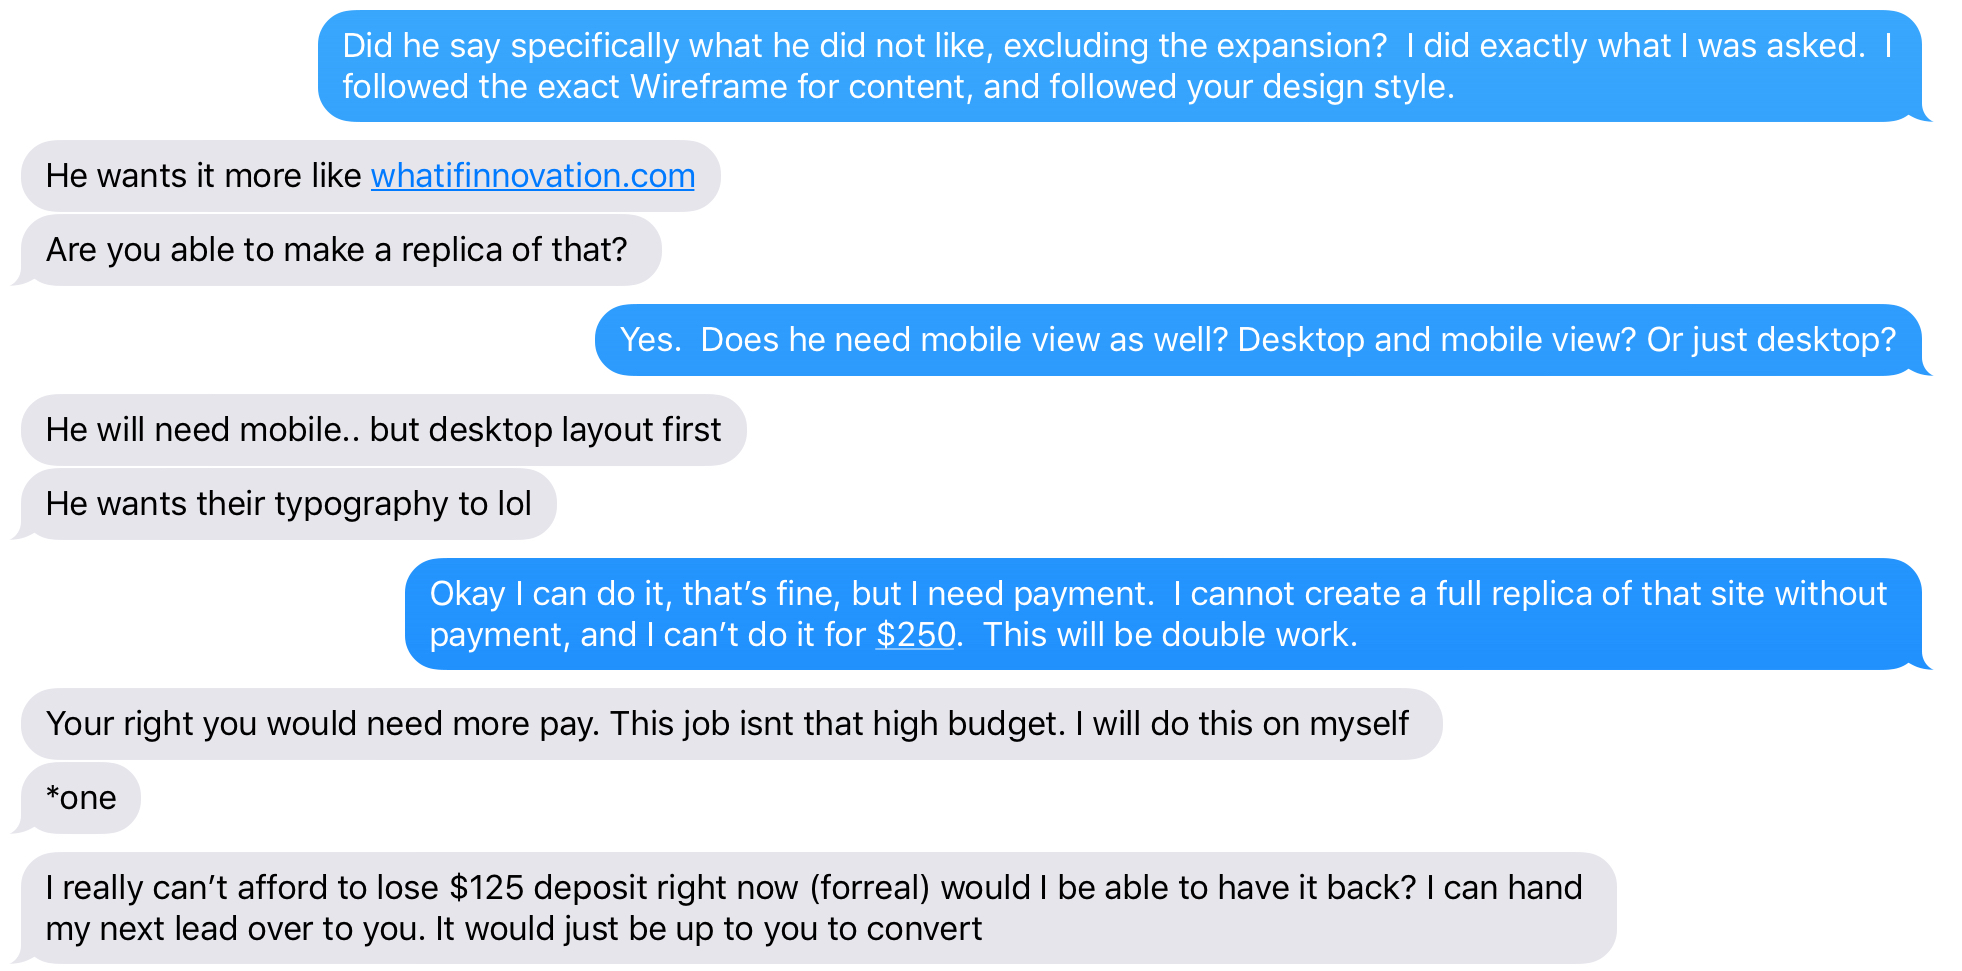 Rick wanted me to build a new site w/o pay.